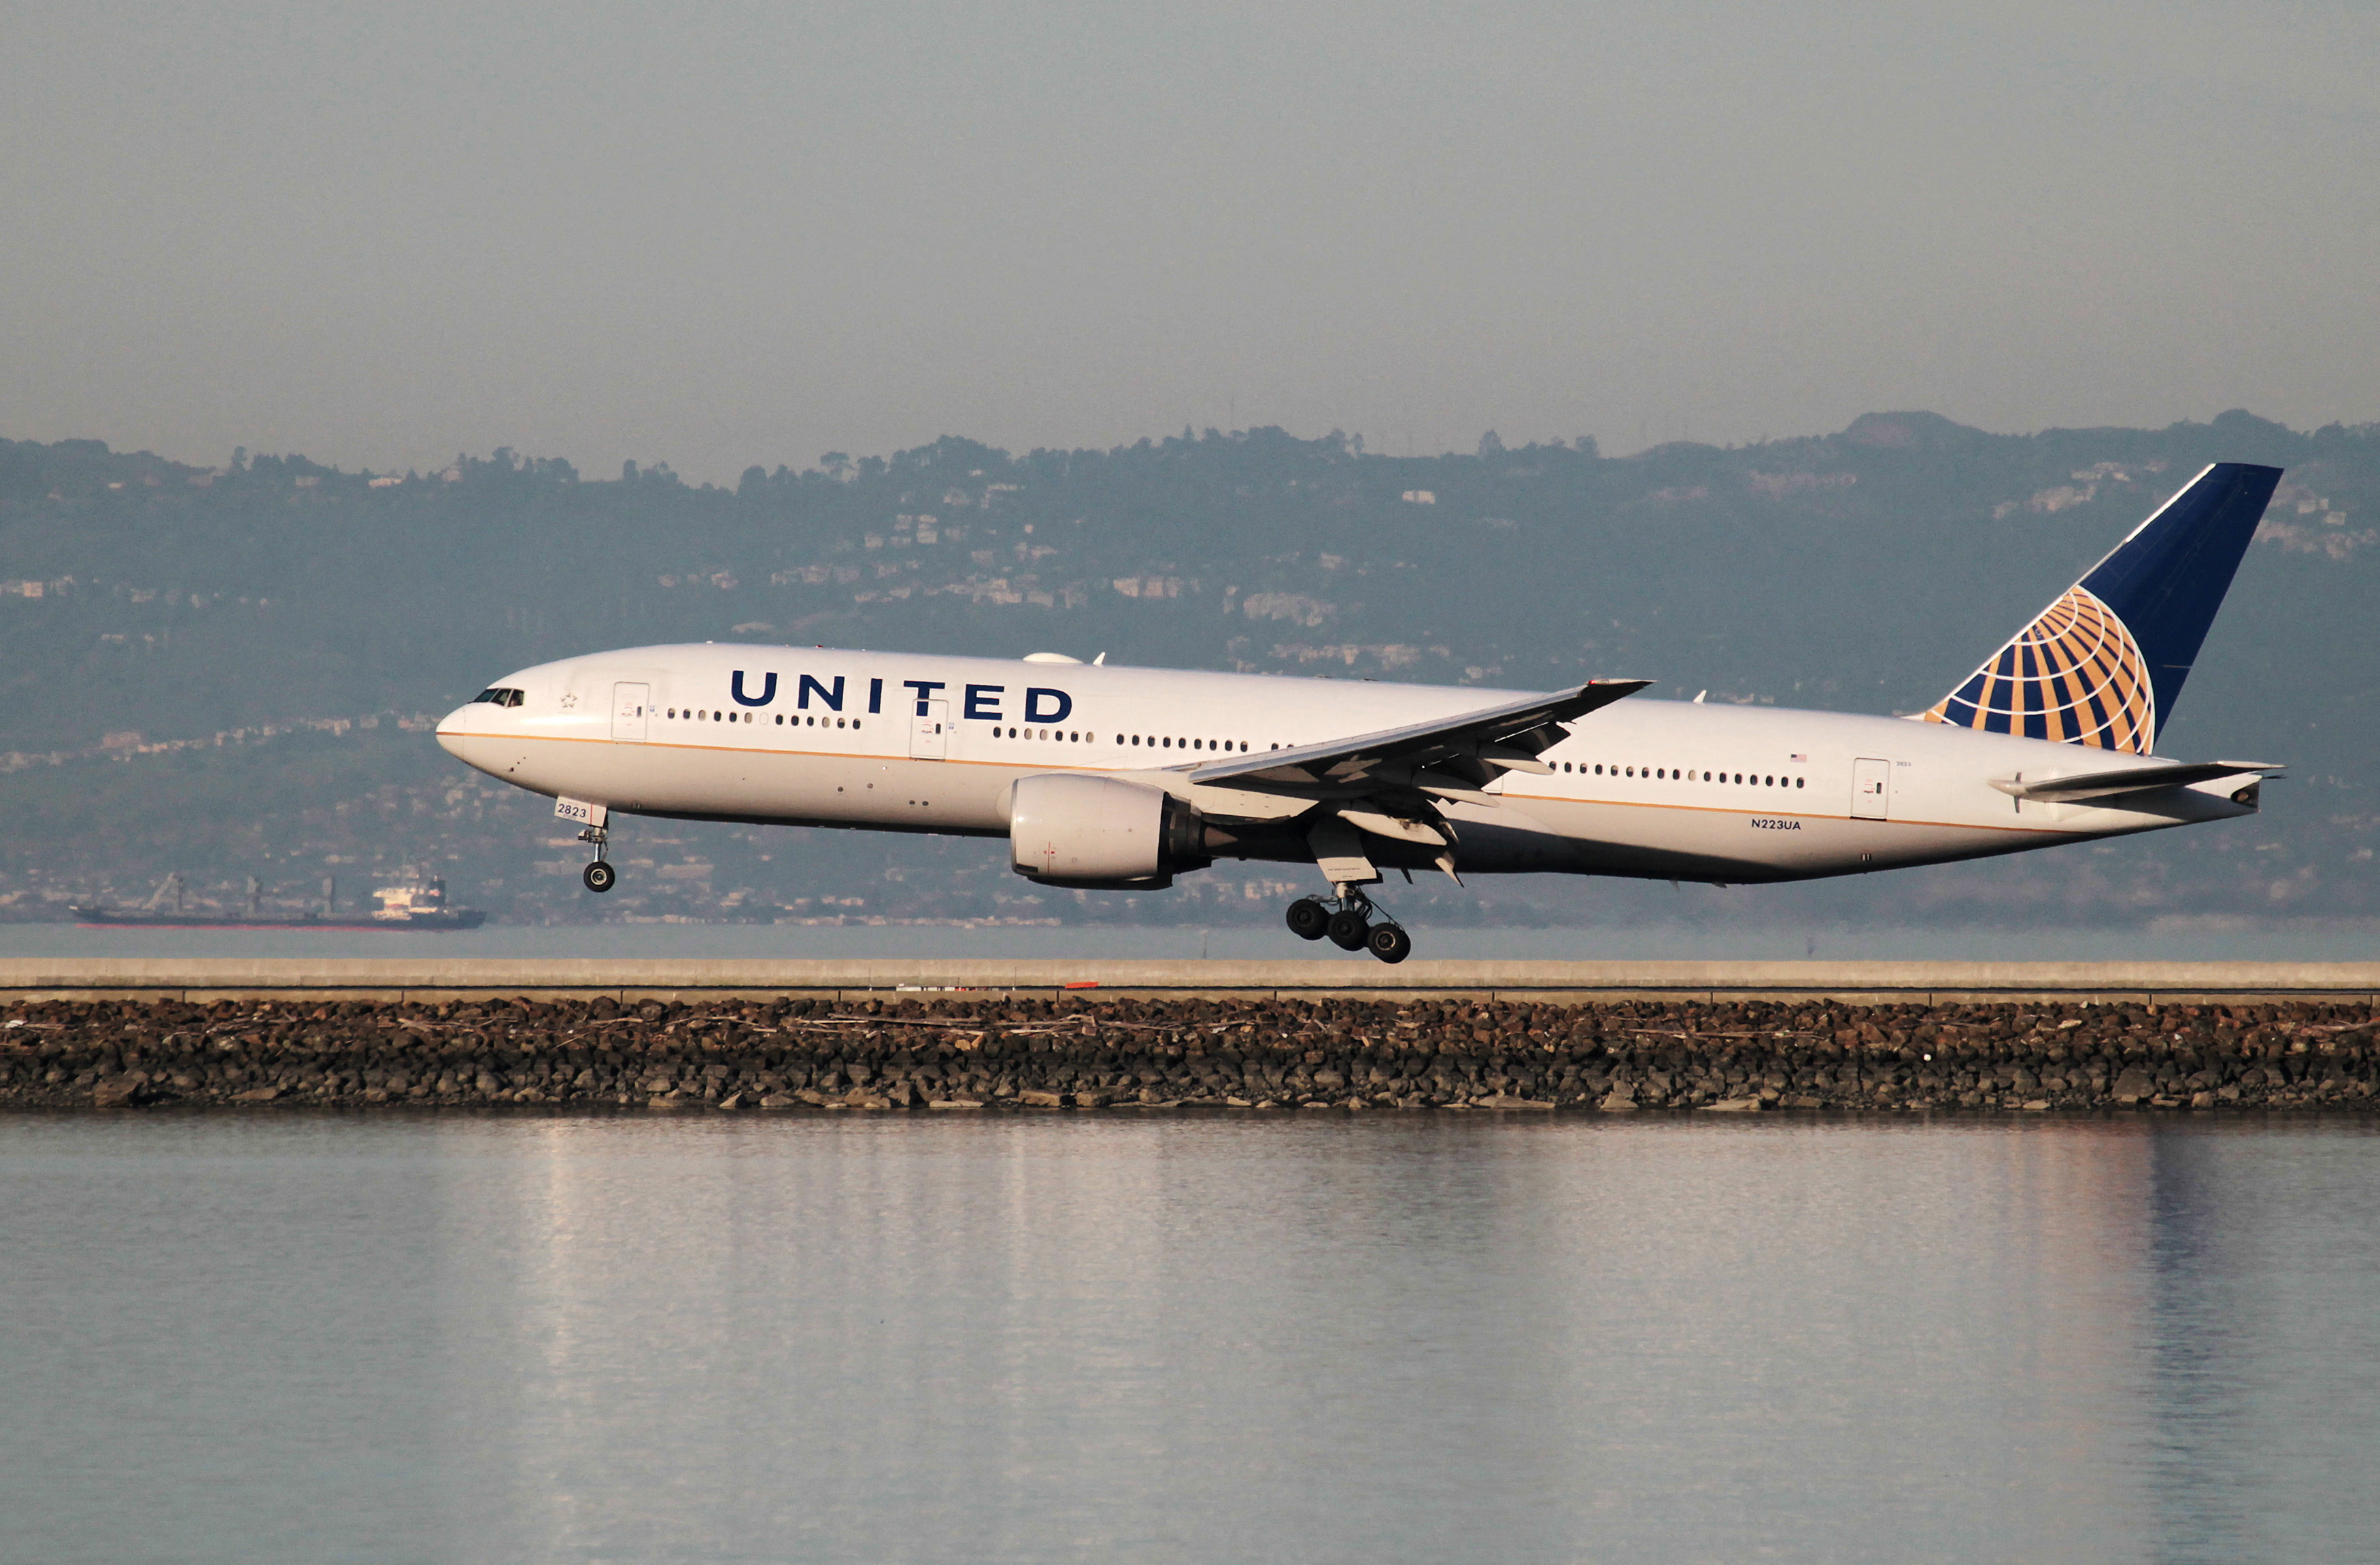 A United Airlines Boeing 777-200 lands at San Francisco International Airport, San Francisco